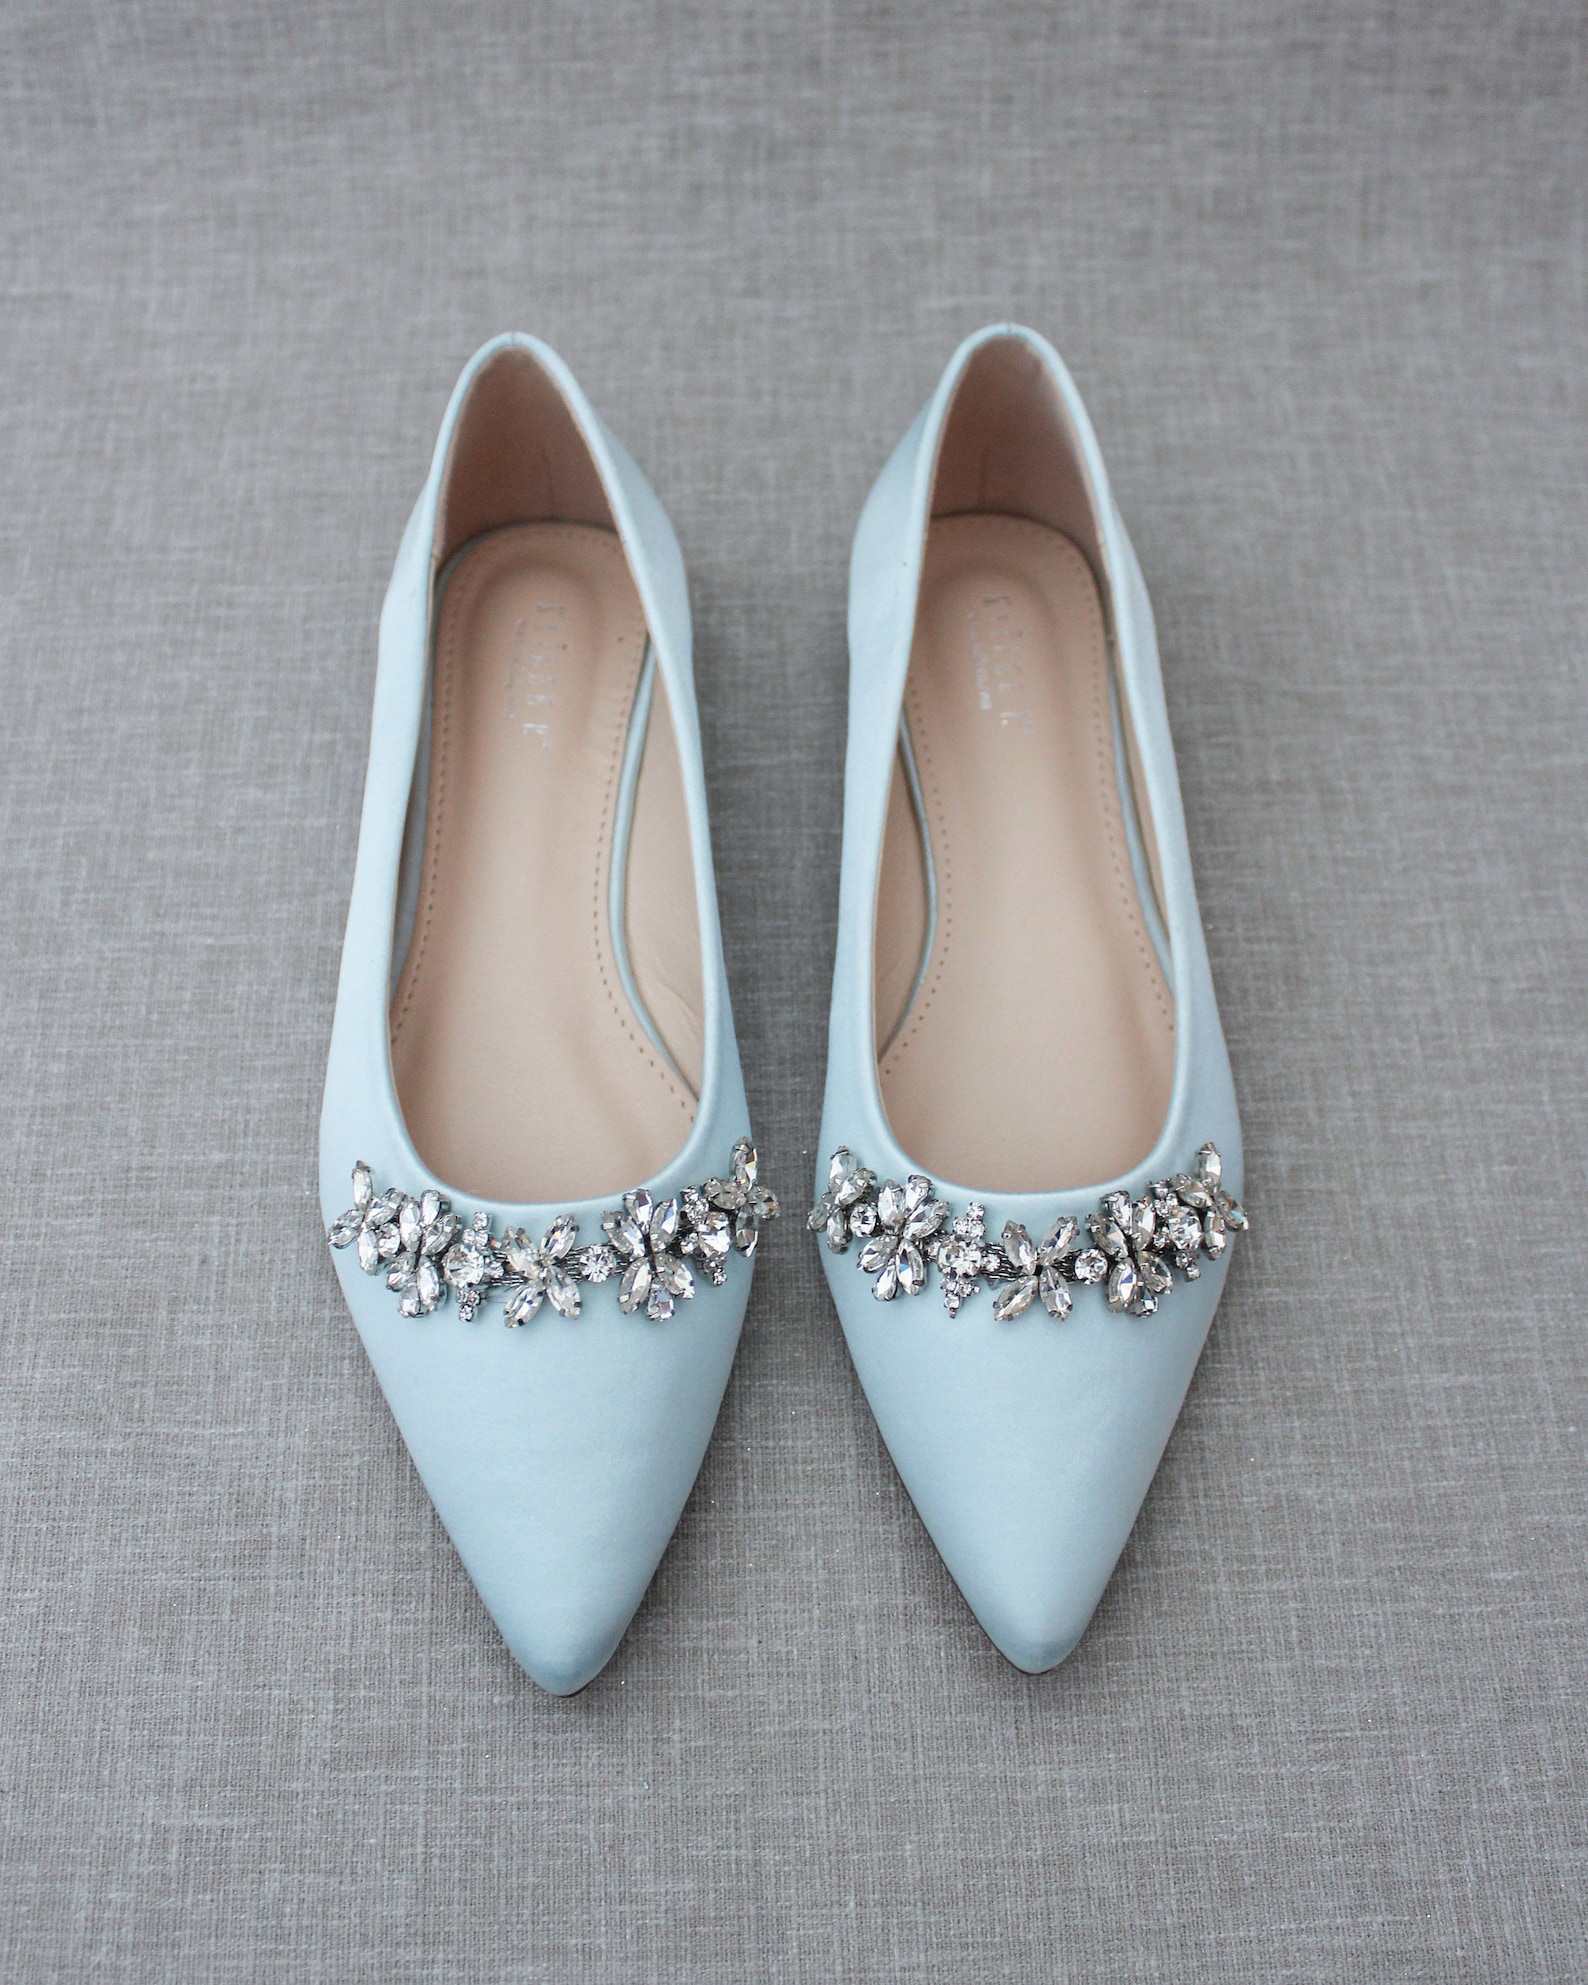 Light Blue Satin Pointy Toe Flats With FLORAL RHINESTONES - Etsy